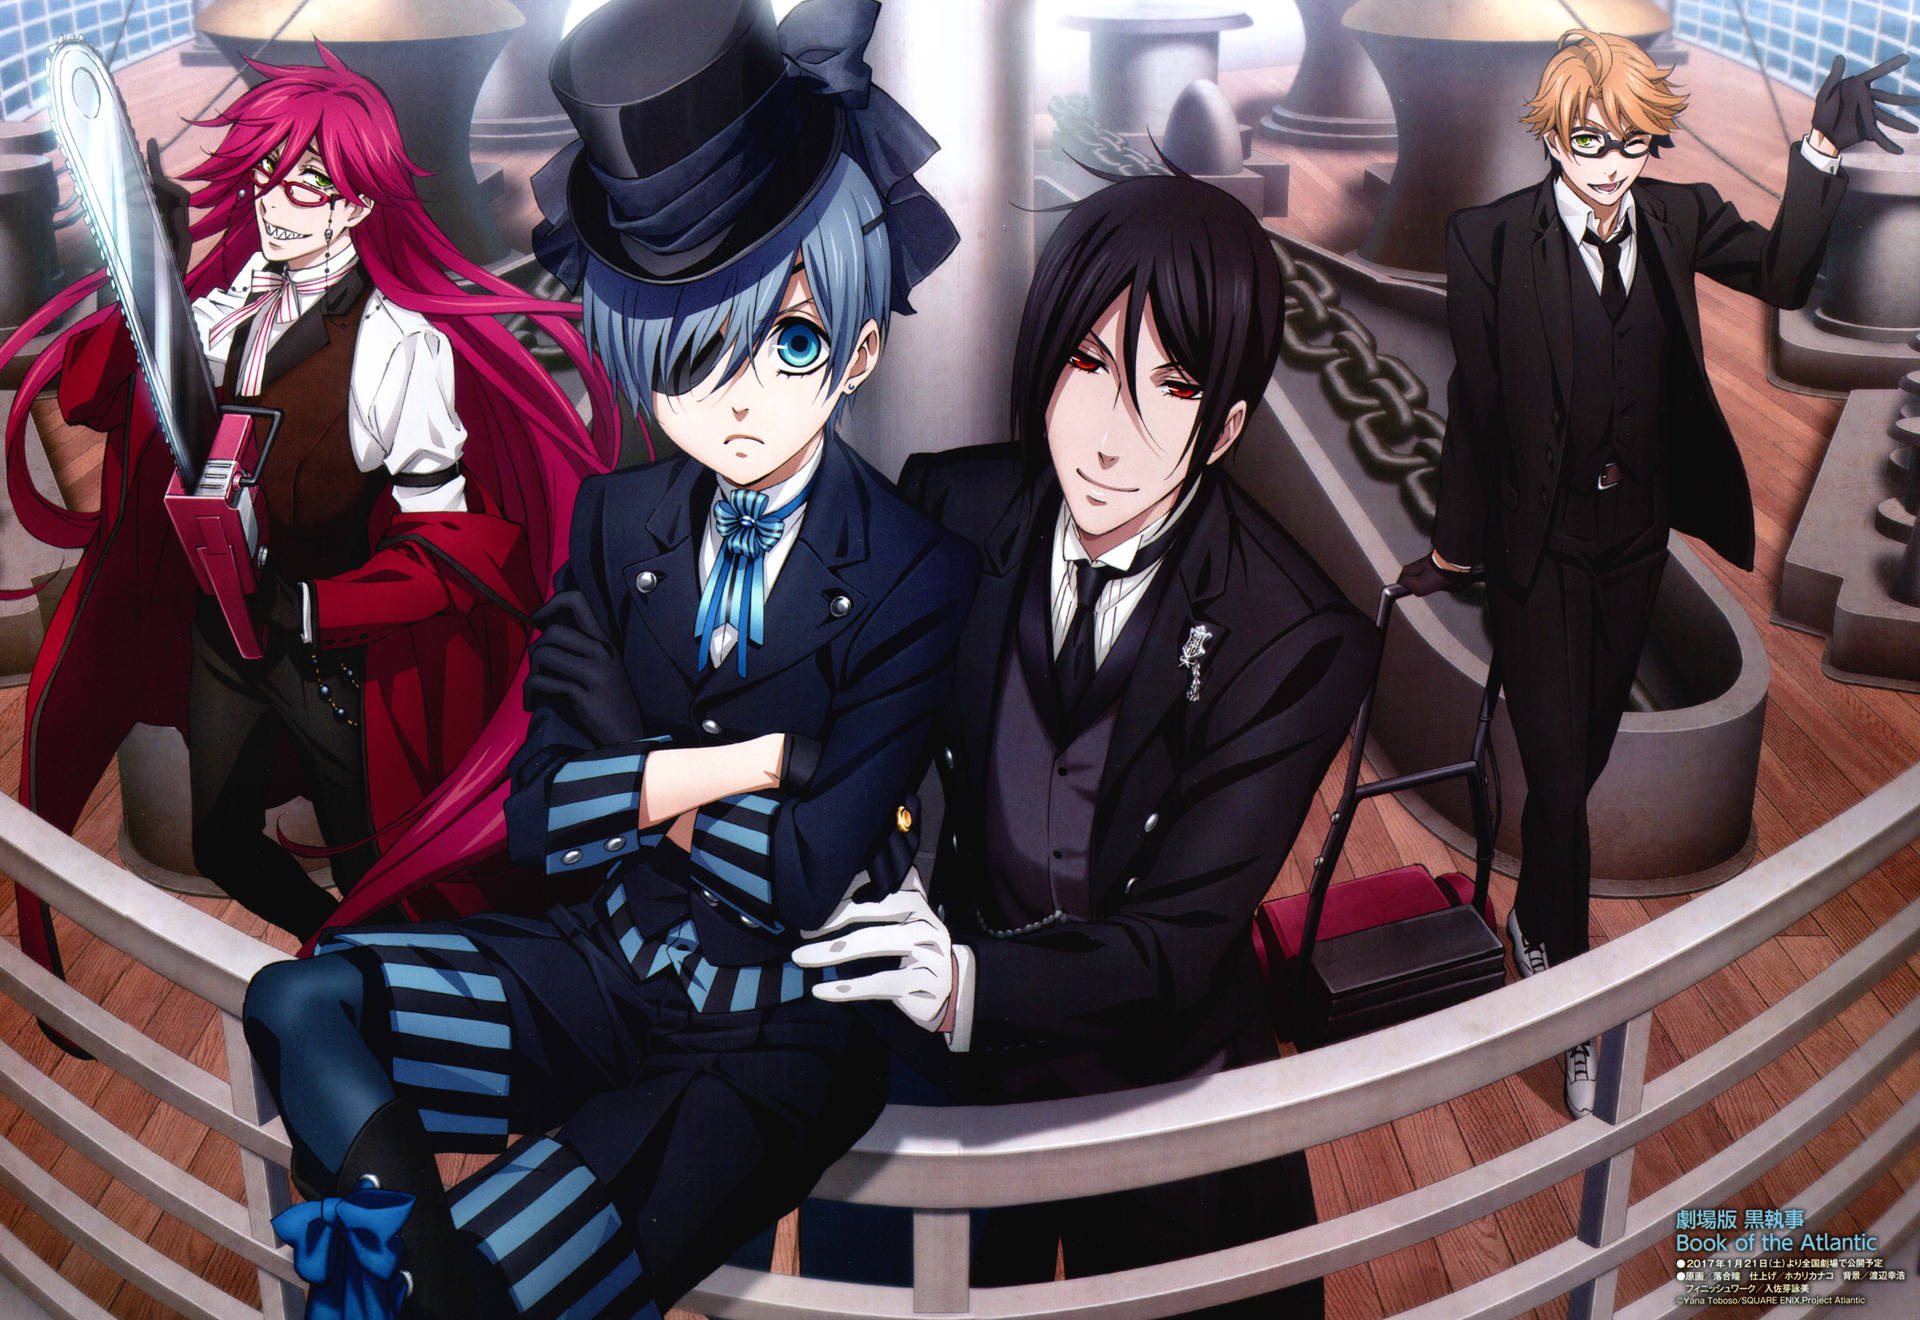 Top 999+ Black Butler Wallpapers Full HD, 4K✅Free to Use